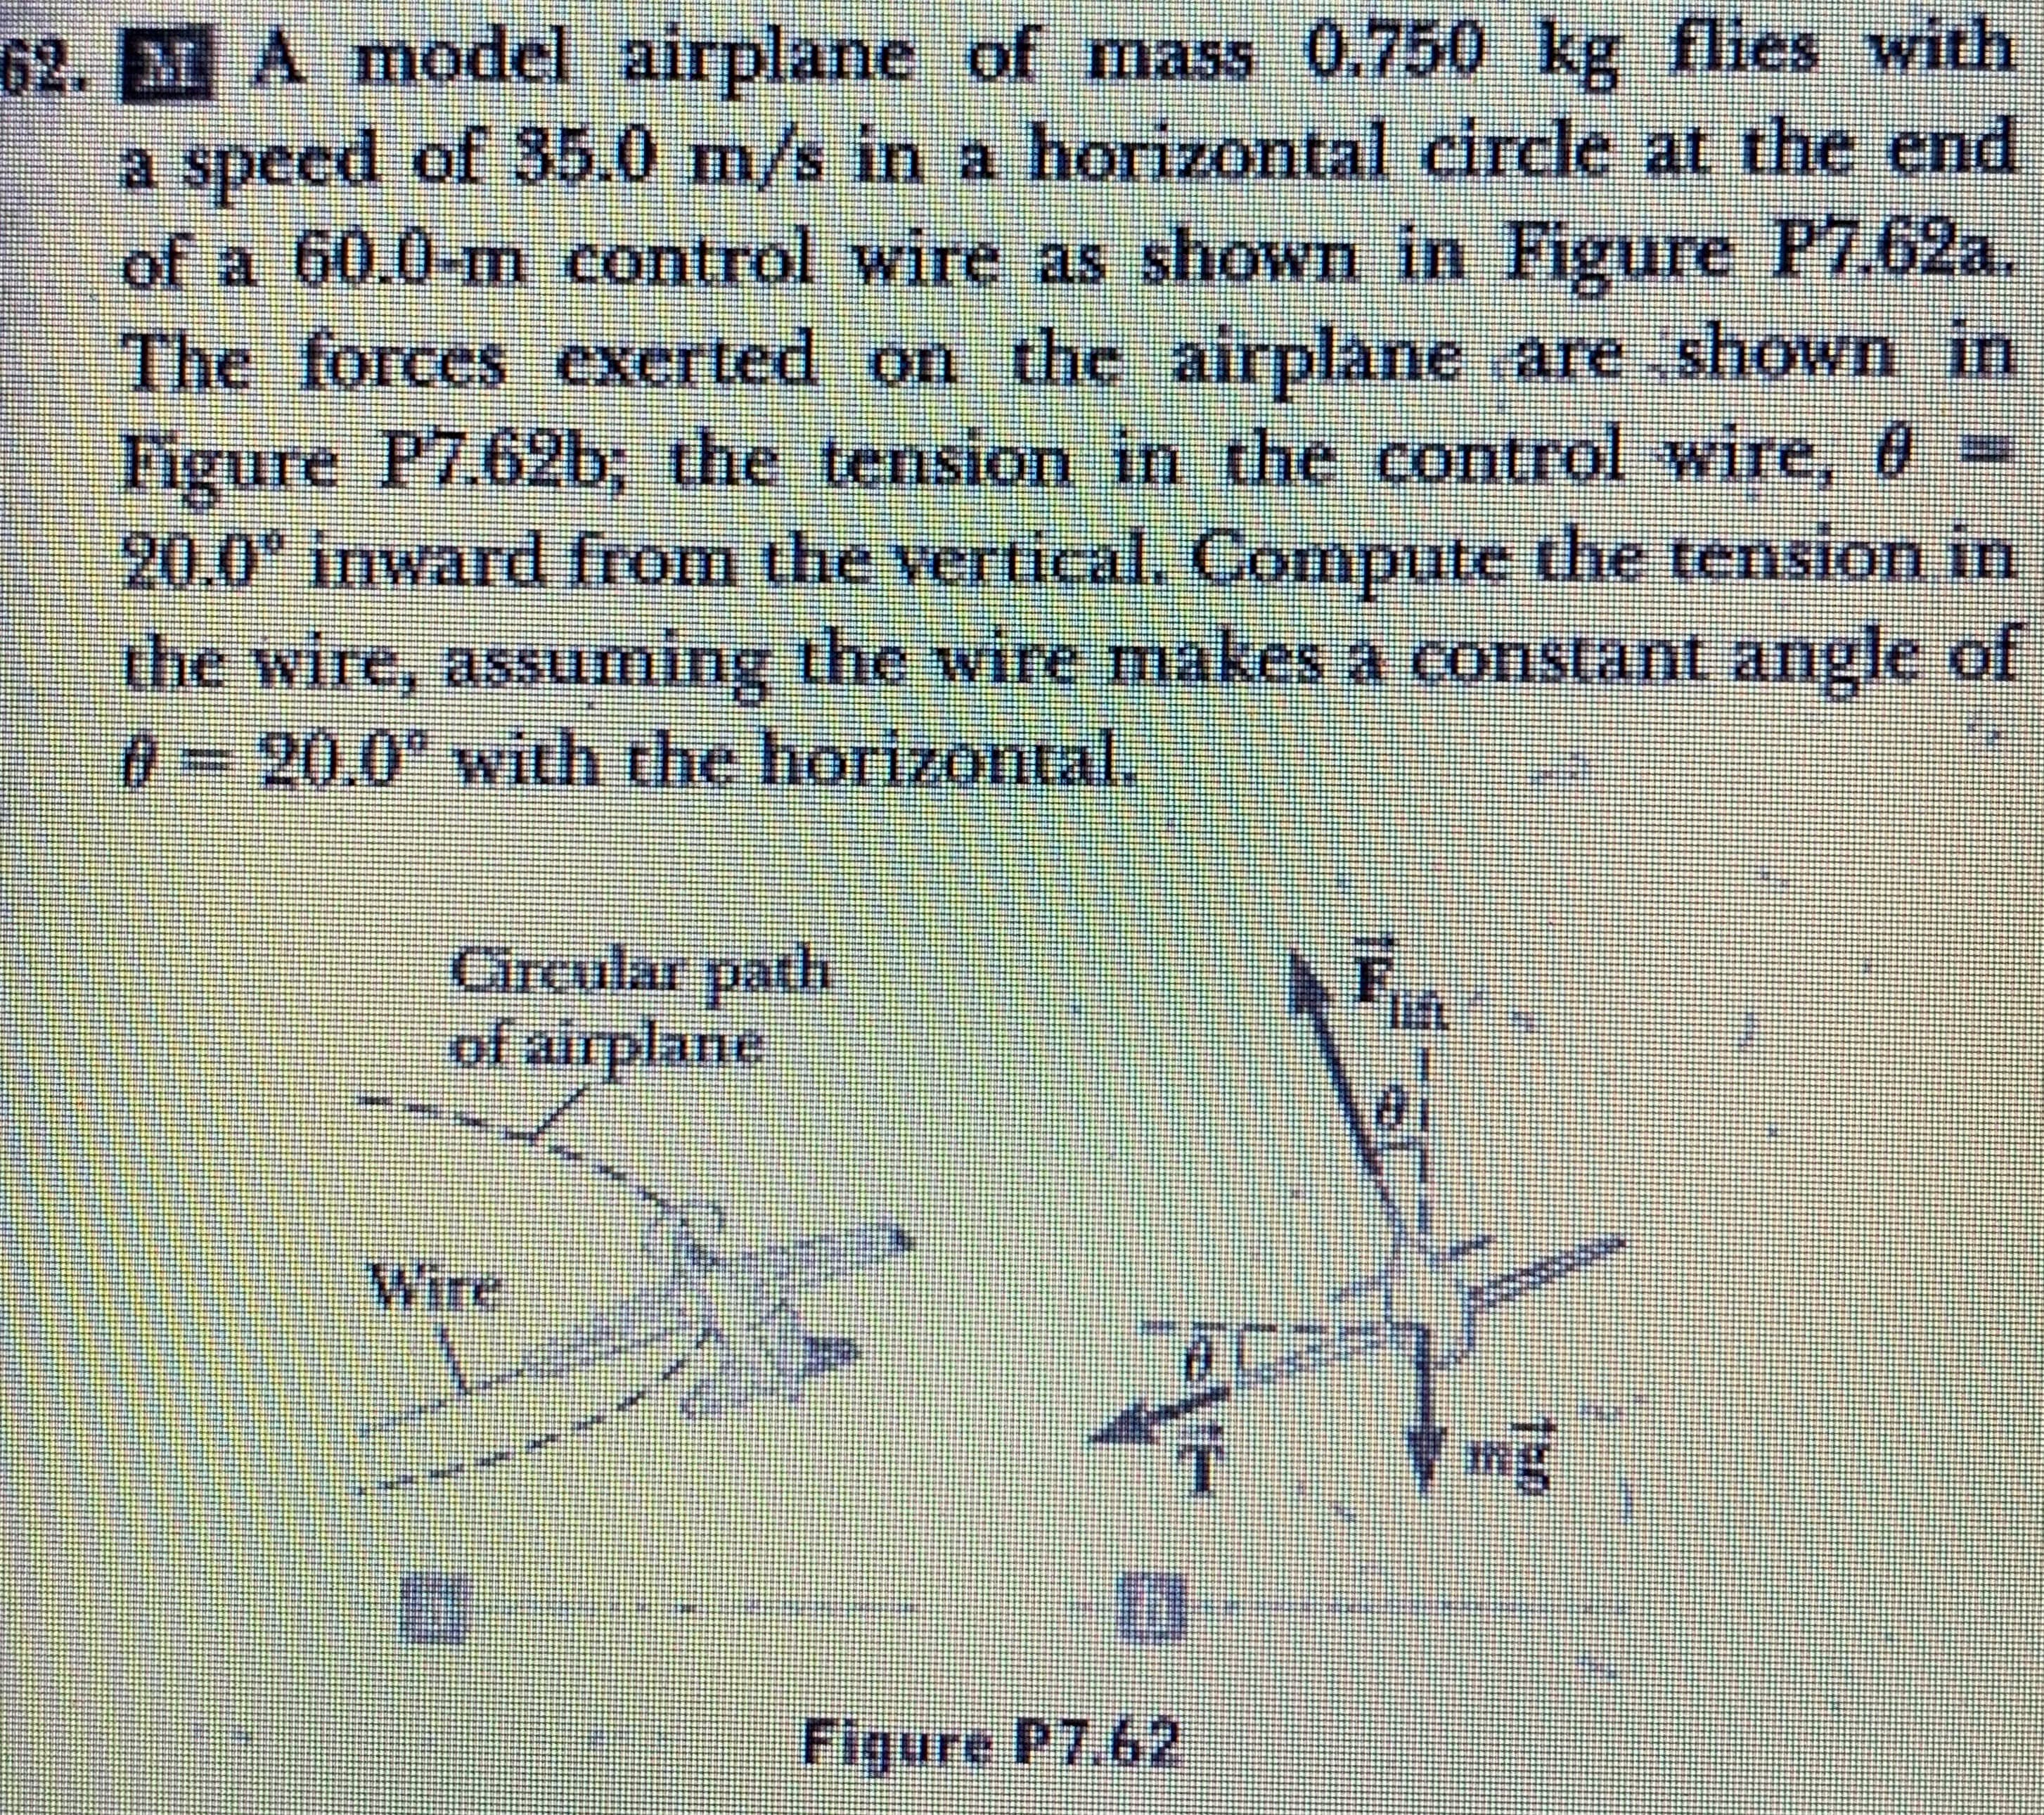 62. MA model airplane of mass 0.750 kg flies with
a speed of 35.0 m/s in a horizontal circle at the end
of a 60.0-m control wire as shown in Figure P7.62a.
The forces exerted on the airplane are.shown in
Figure P7.62b, the tension in the control wire, 0 =
20.0" inward from the vertical. Compute the tension in
the wire, assuming the wire makes a constant angle ot
0320.0* with the horizontal.
Circular path
of airplane
Wire
Figure P7.62
